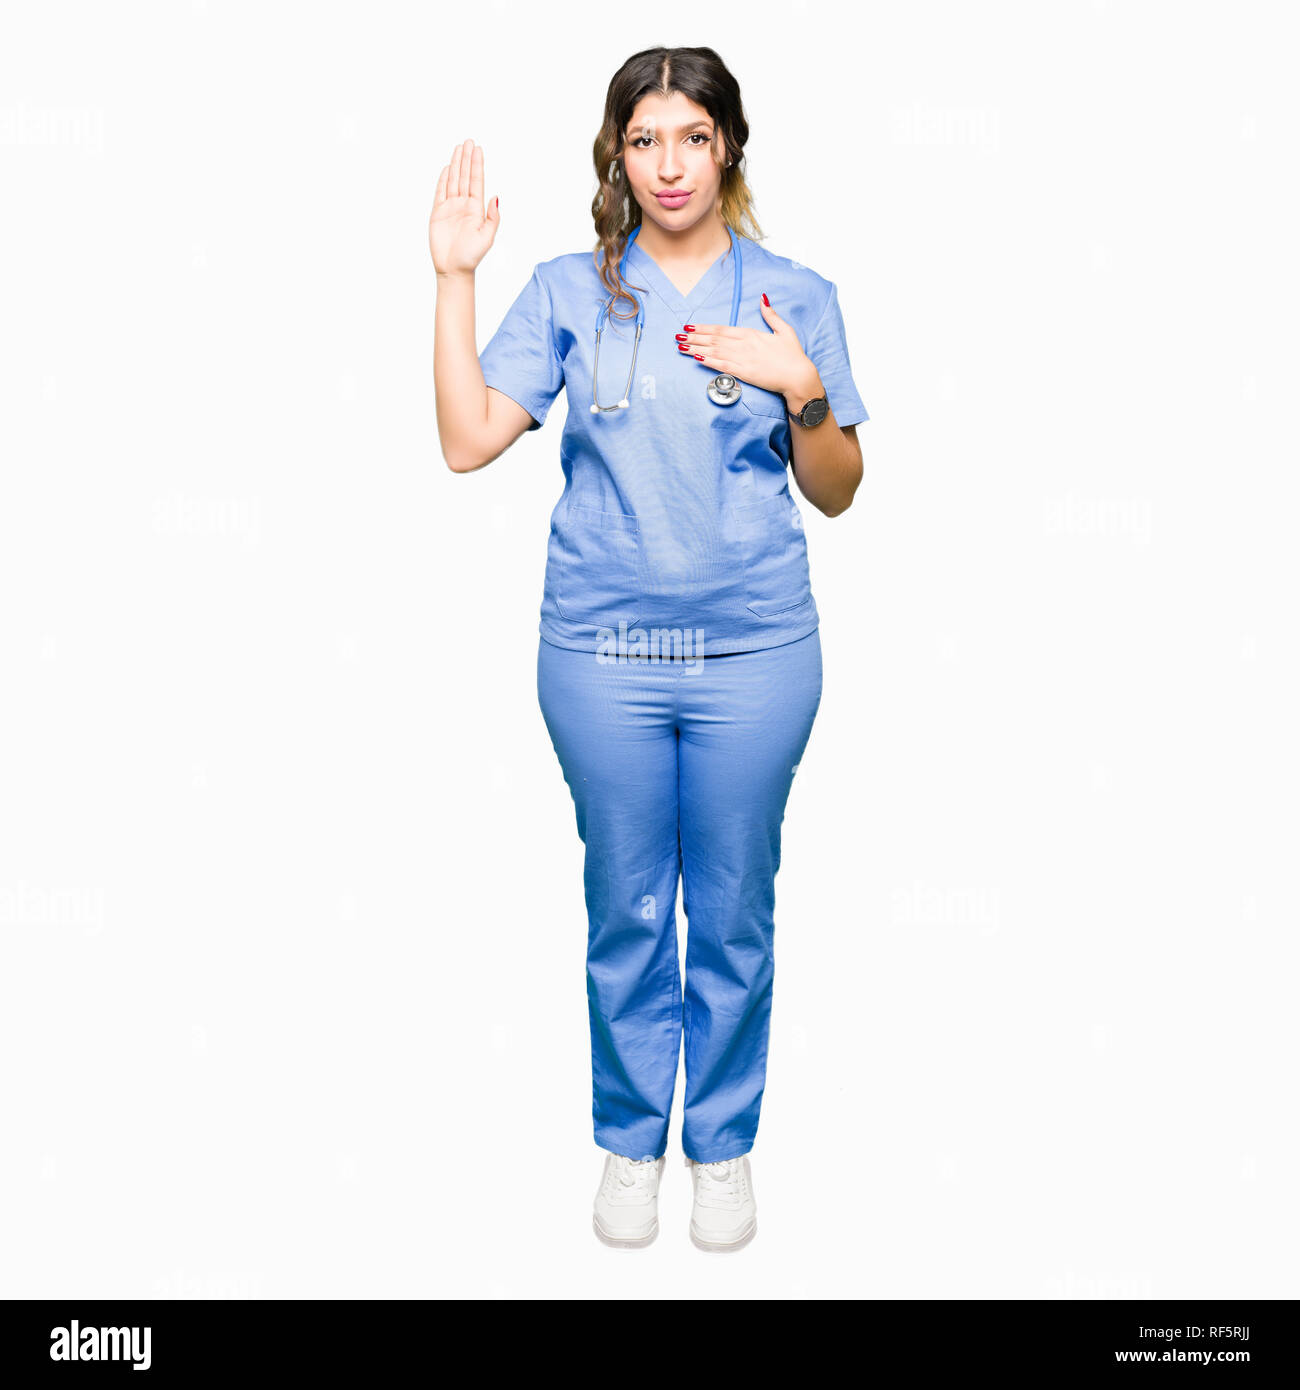 Young adult doctor woman wearing medical uniform Swearing with hand on chest and open palm, making a loyalty promise oath Stock Photo